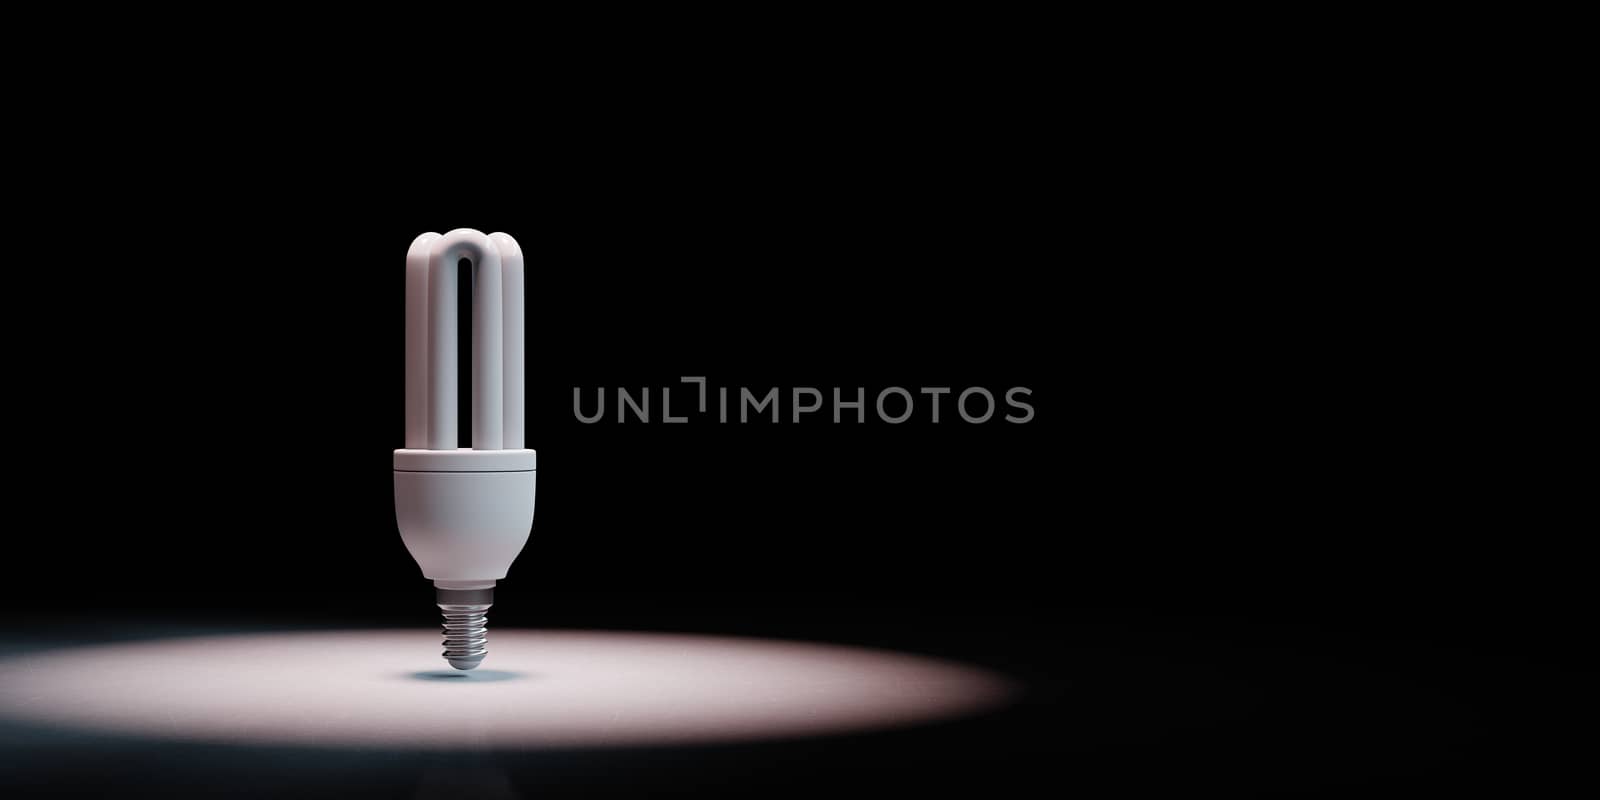 Single Fluorescent Lamp Spotlighted on Black Background with Copy Space 3D Illustration